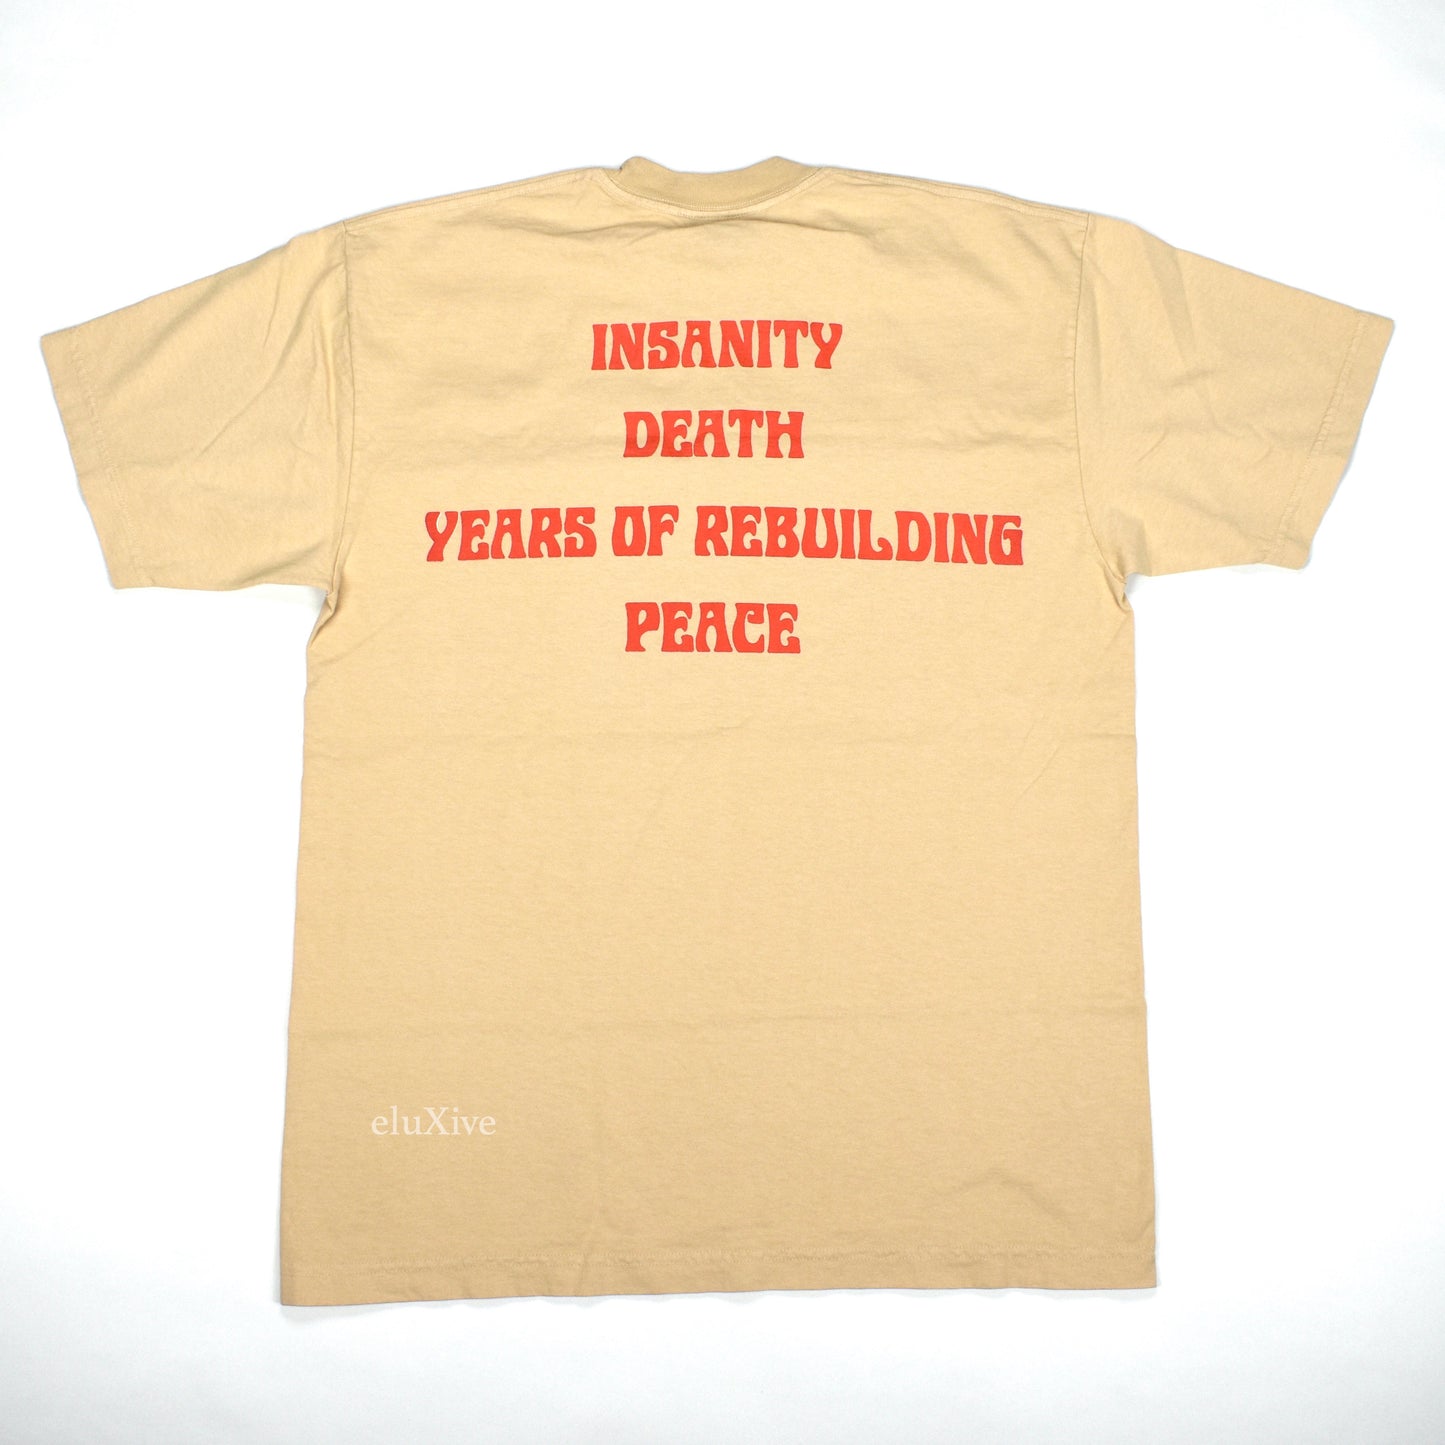 Online Ceramics - Insanity Death Years of Rebuilding Peace T-Shirt